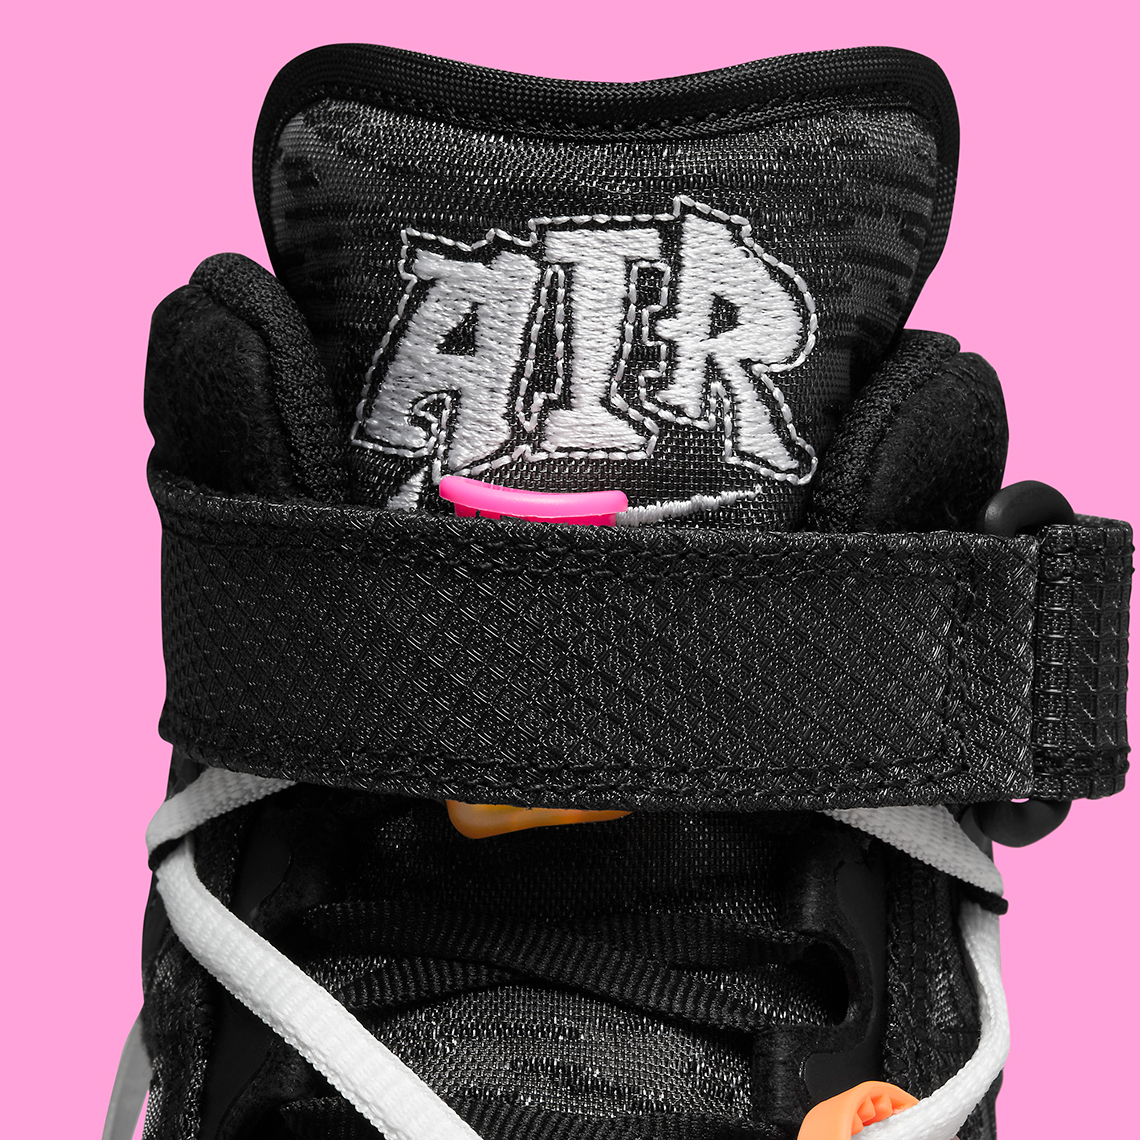 🧱 Off-White Air Force 1 Mid Black on feet 🧱 : r/Sneakers